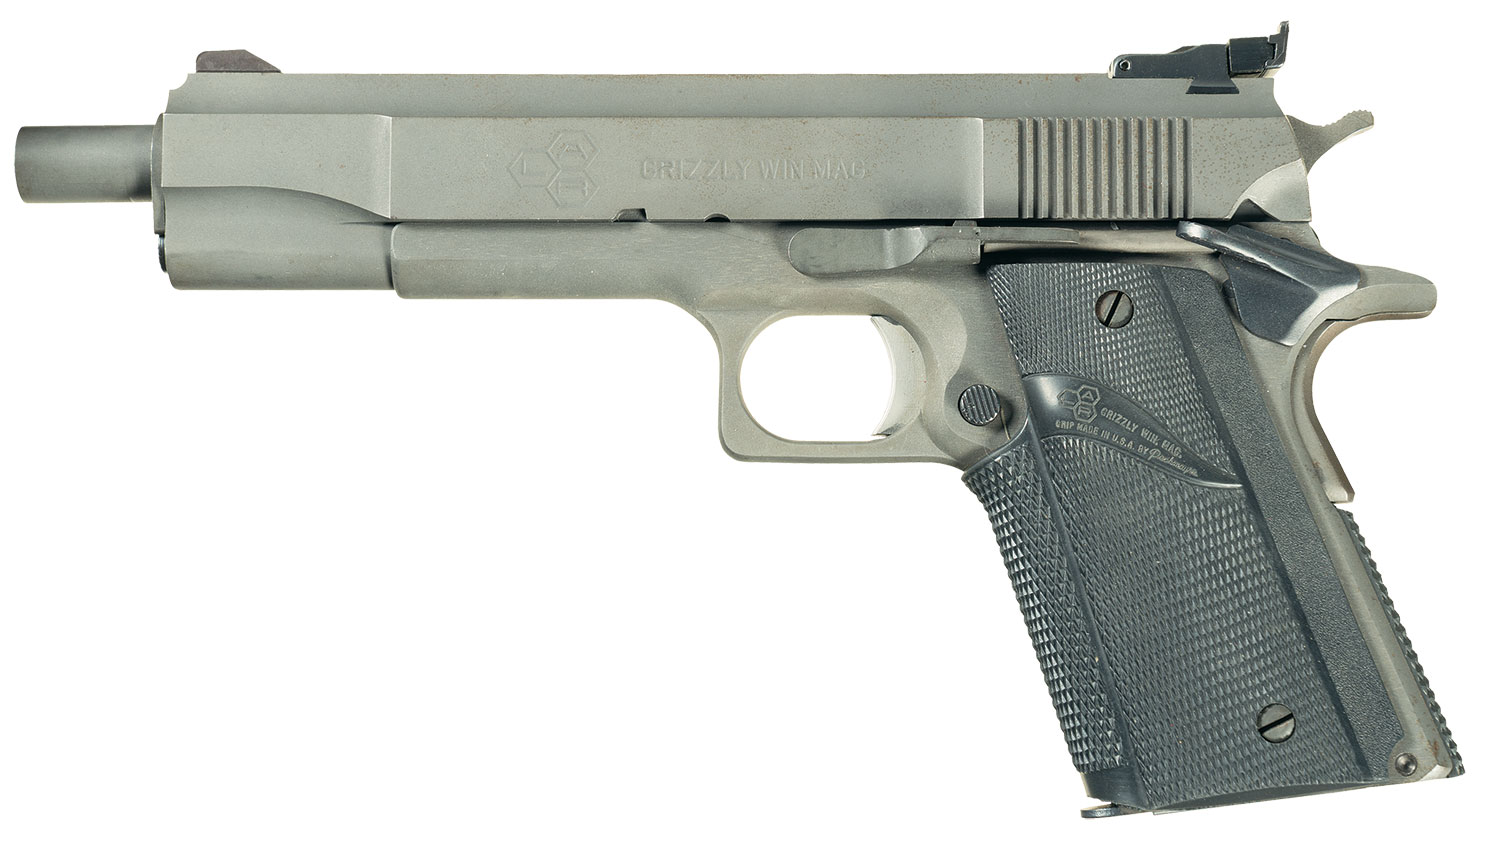 Lar Mfg Co Grizzly Win Mag Pistol 45 Win magnum | Rock Island Auction